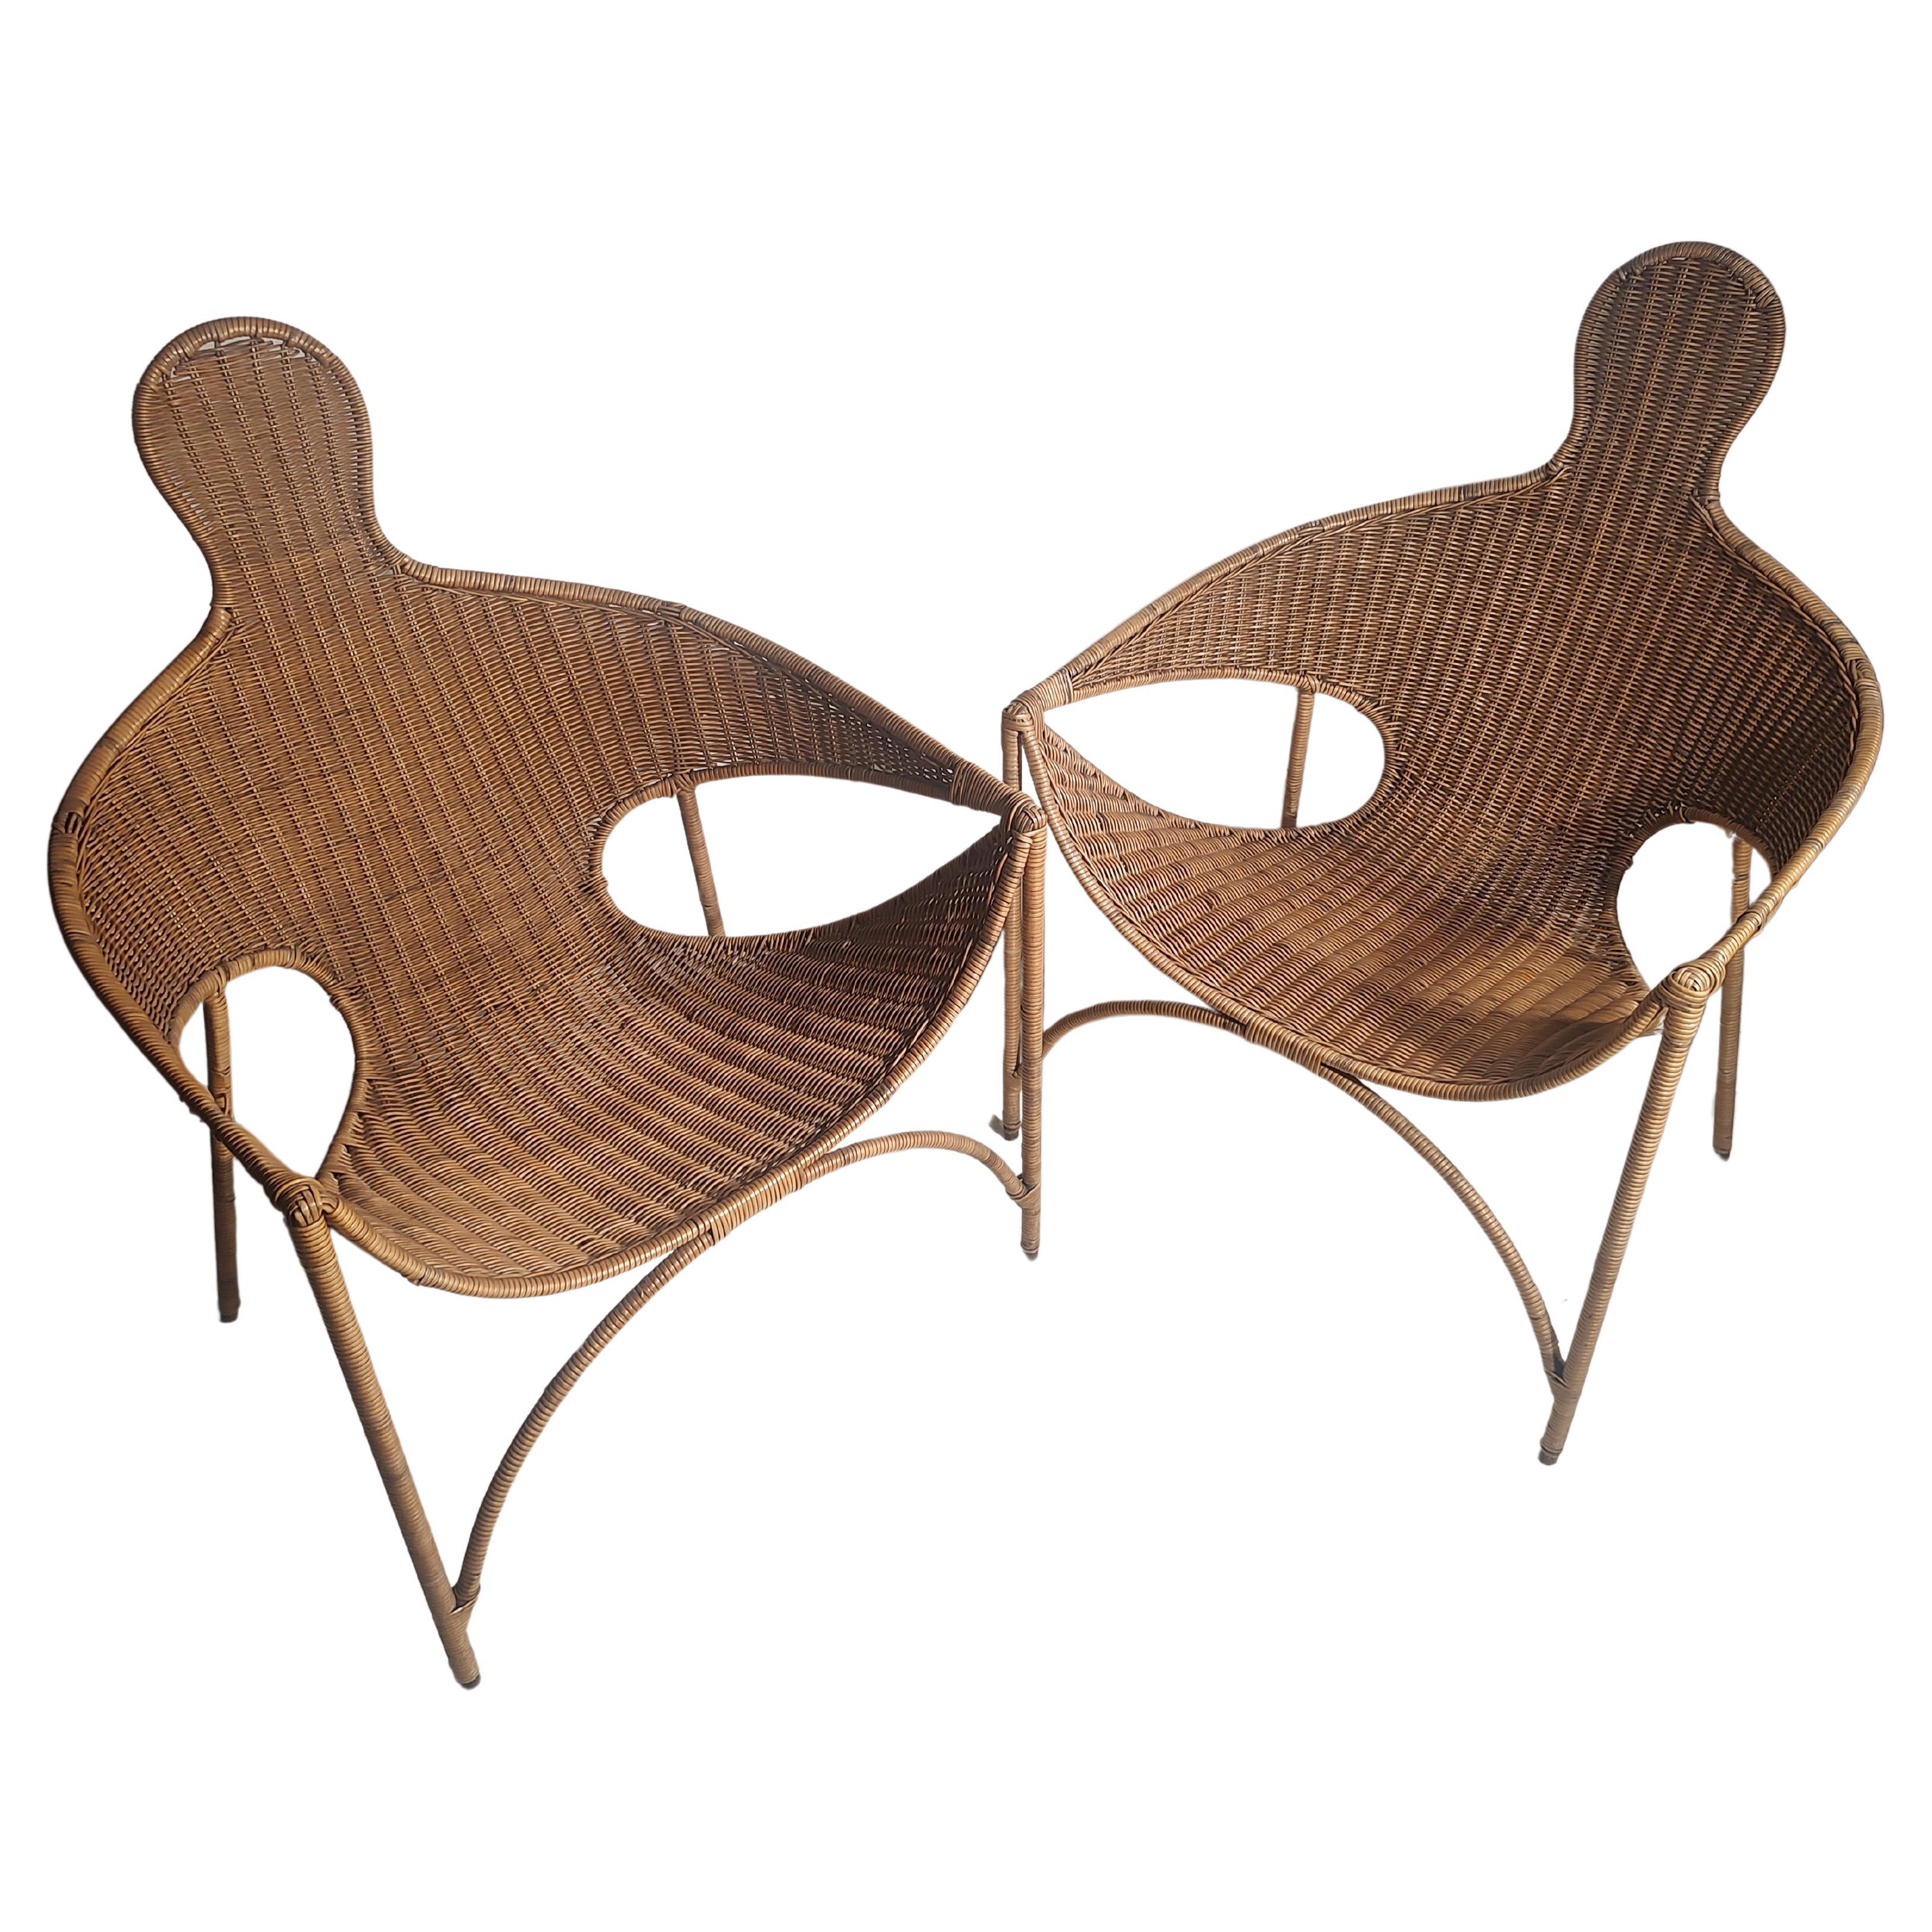 Pair of Mid Century Modern Sculptural Wicker & Iron Lounge Chairs Francis Mair  For Sale 3